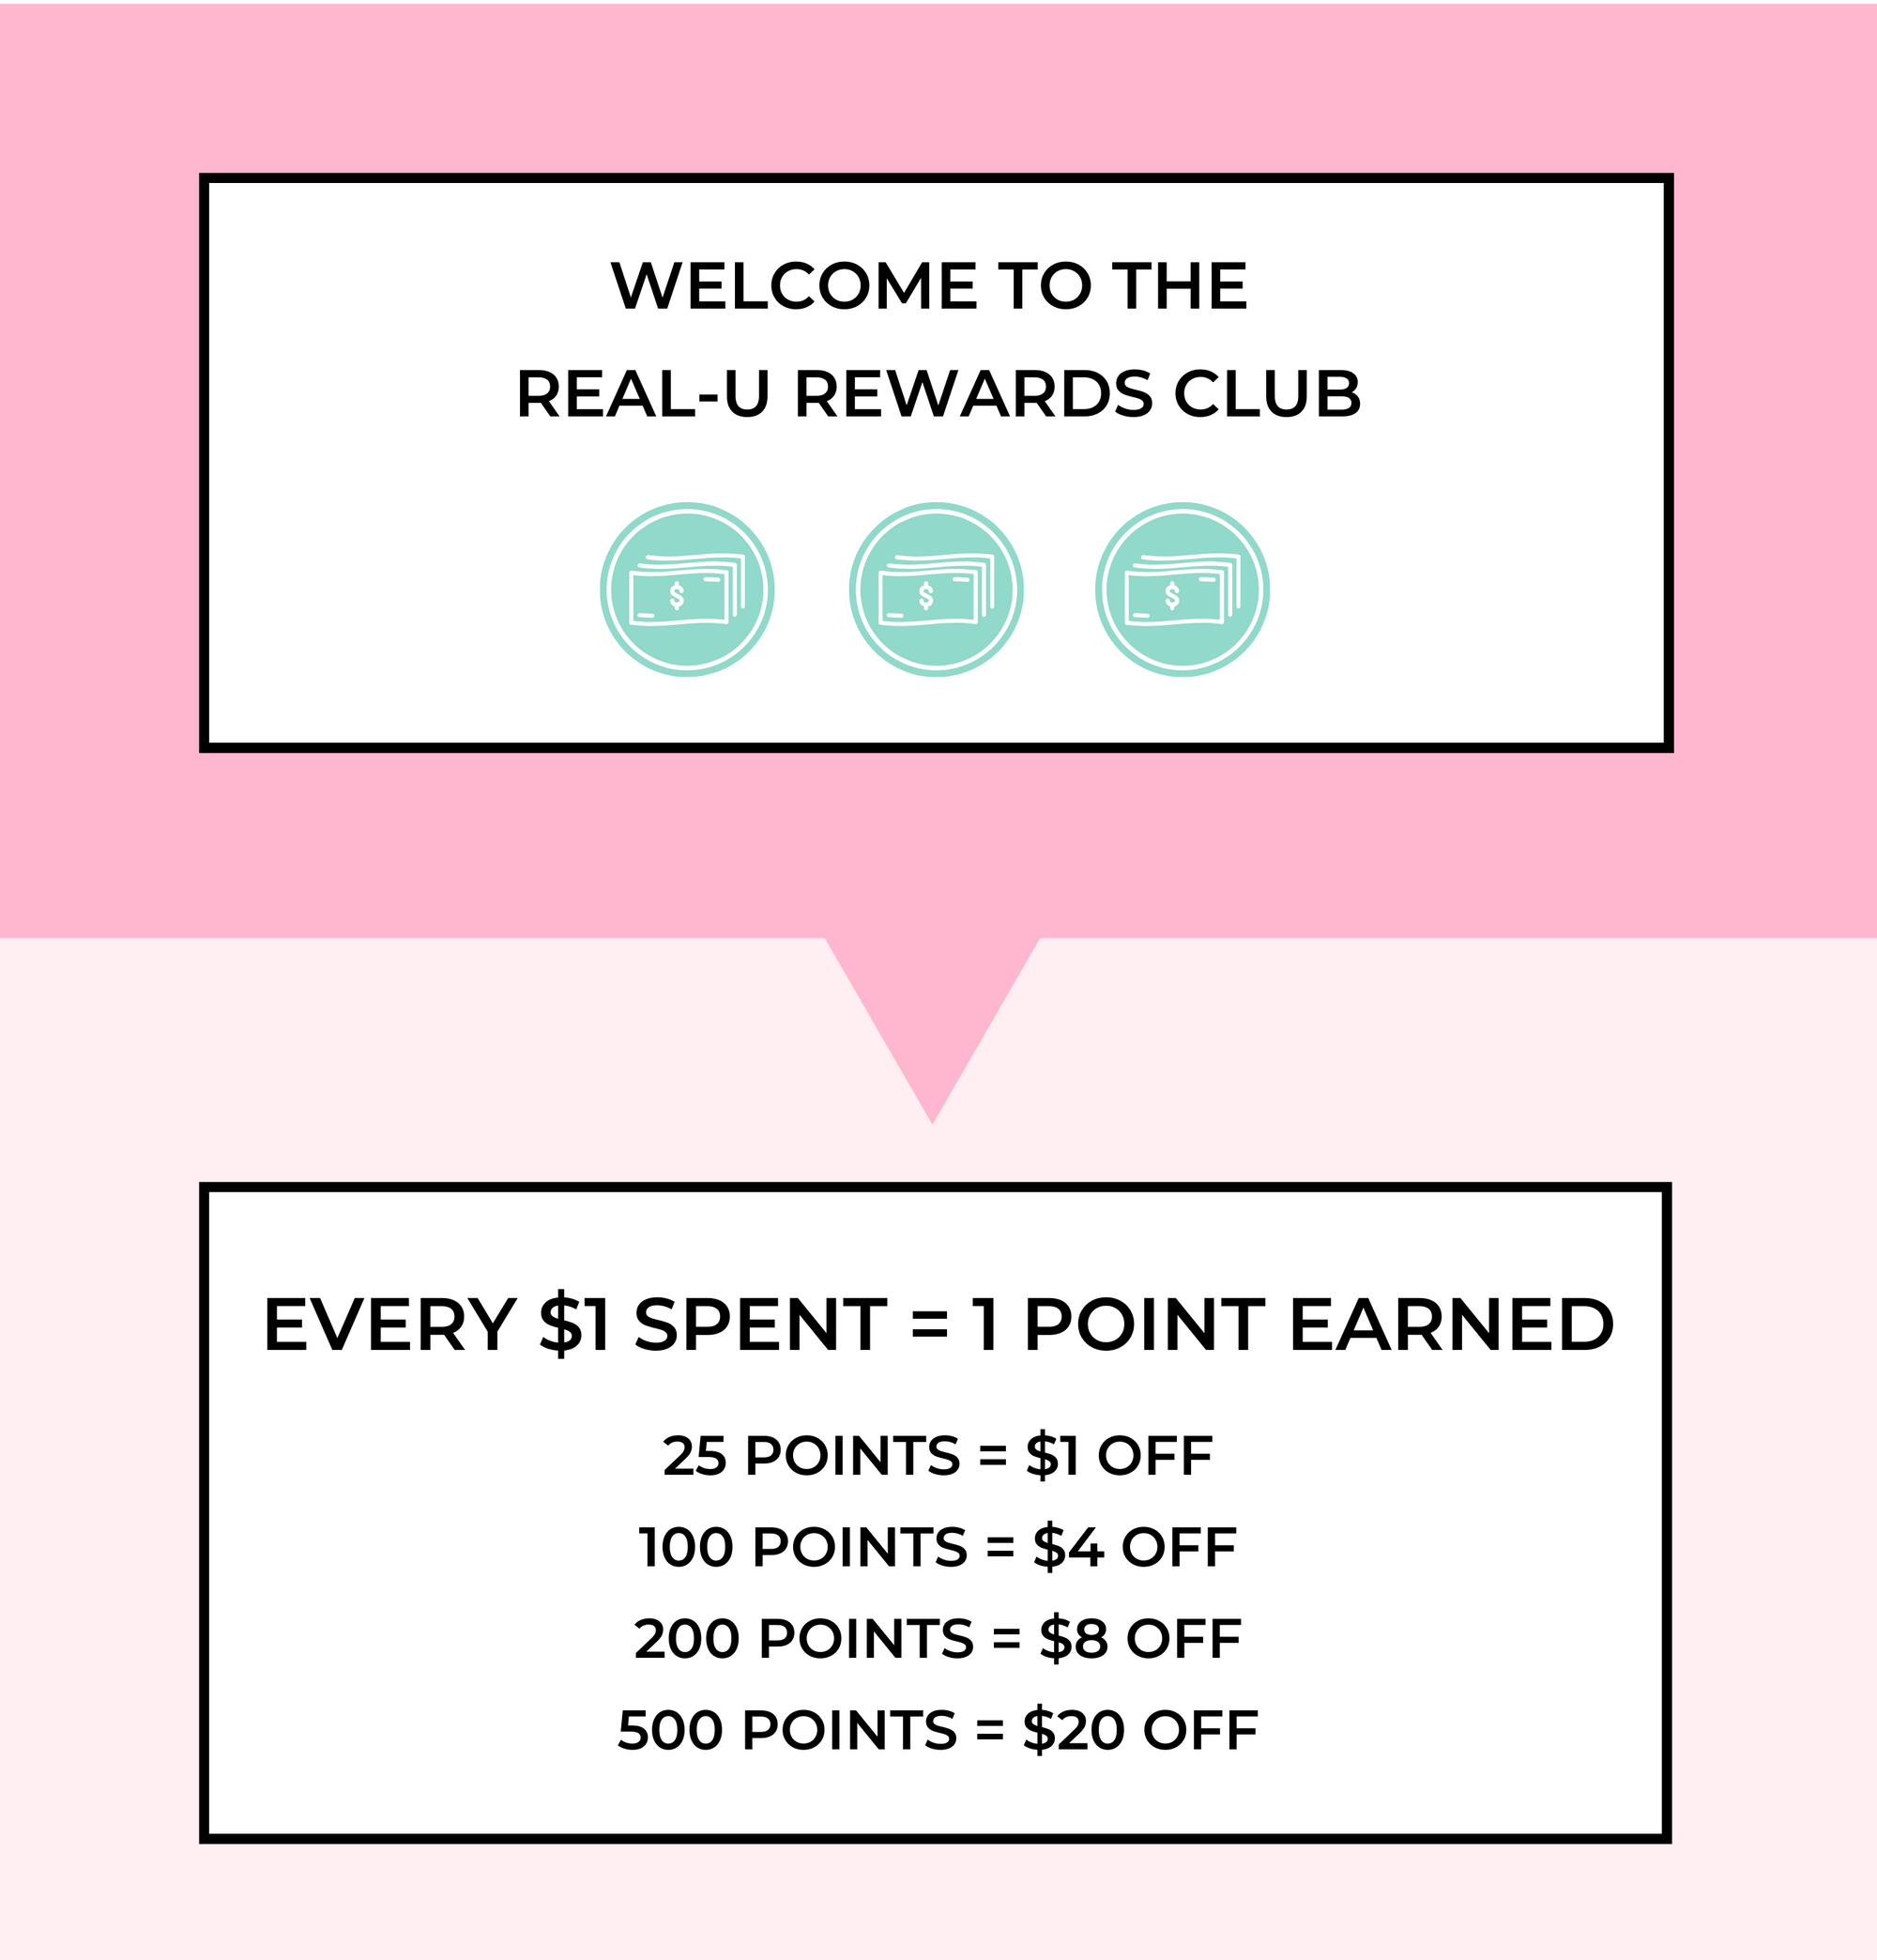 real-u rewards. Every $1 spent = 1 point earned. 25 points = $1 off